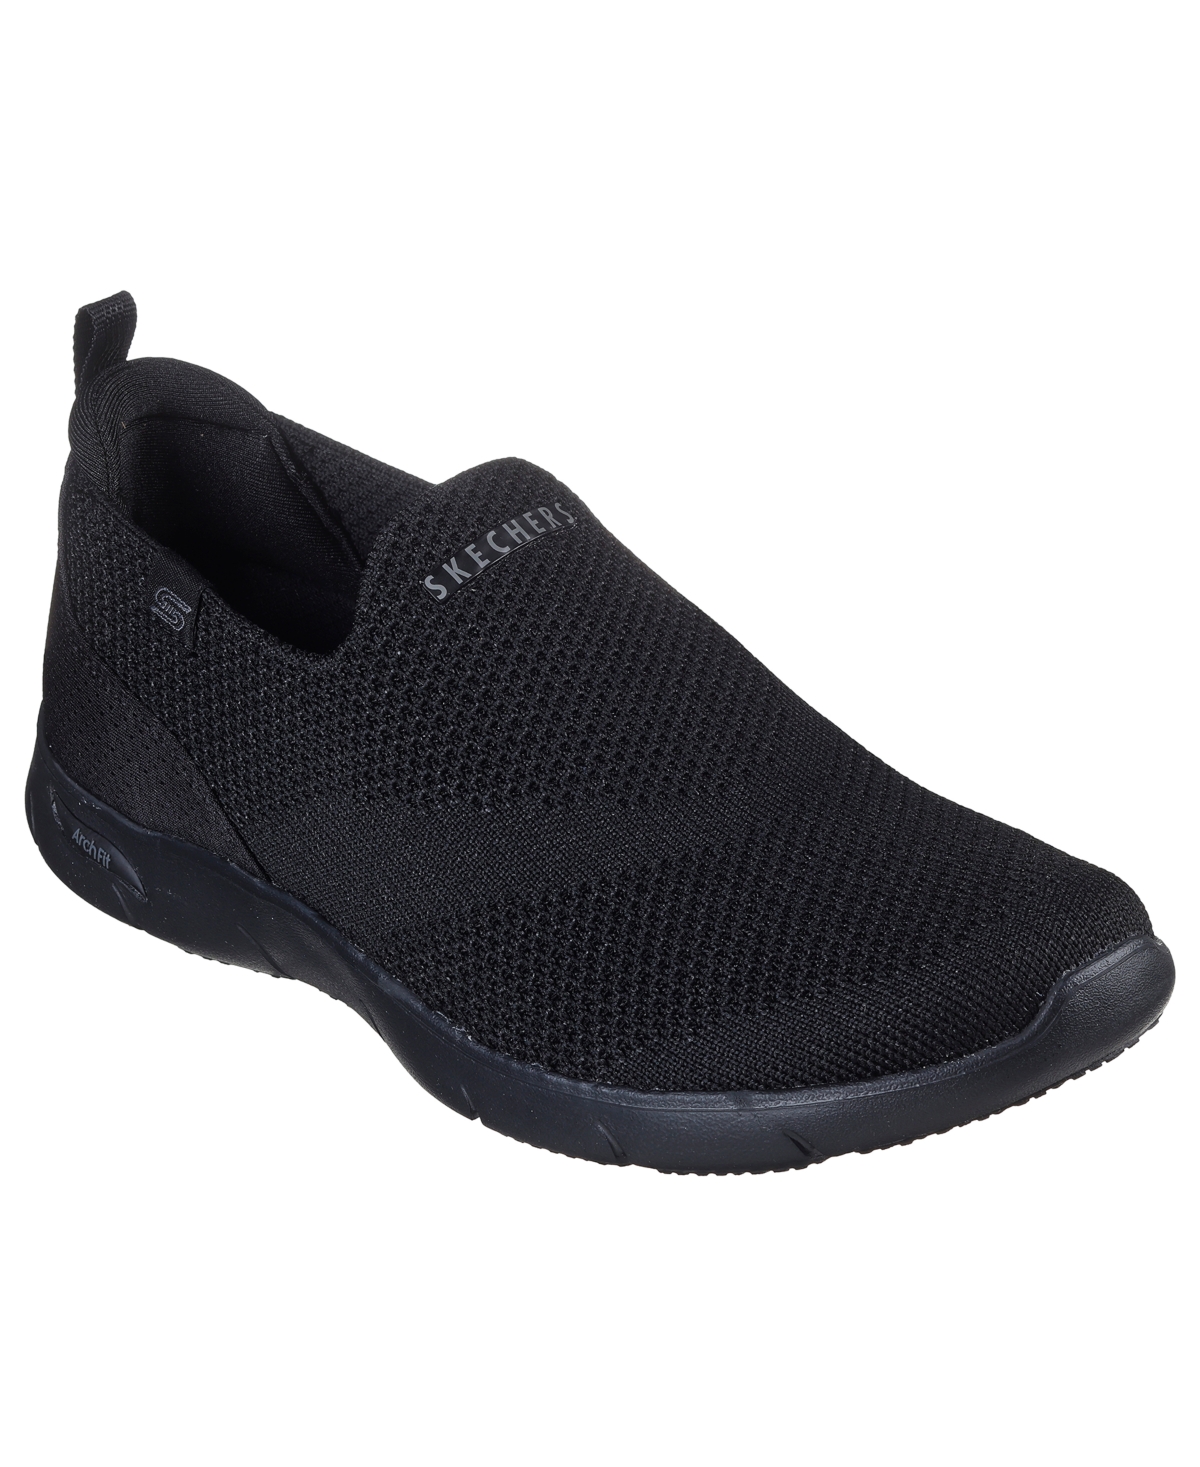 Women's Arch Fit Refine - Iris Slip-On Casual Sneakers from Finish Line - Black